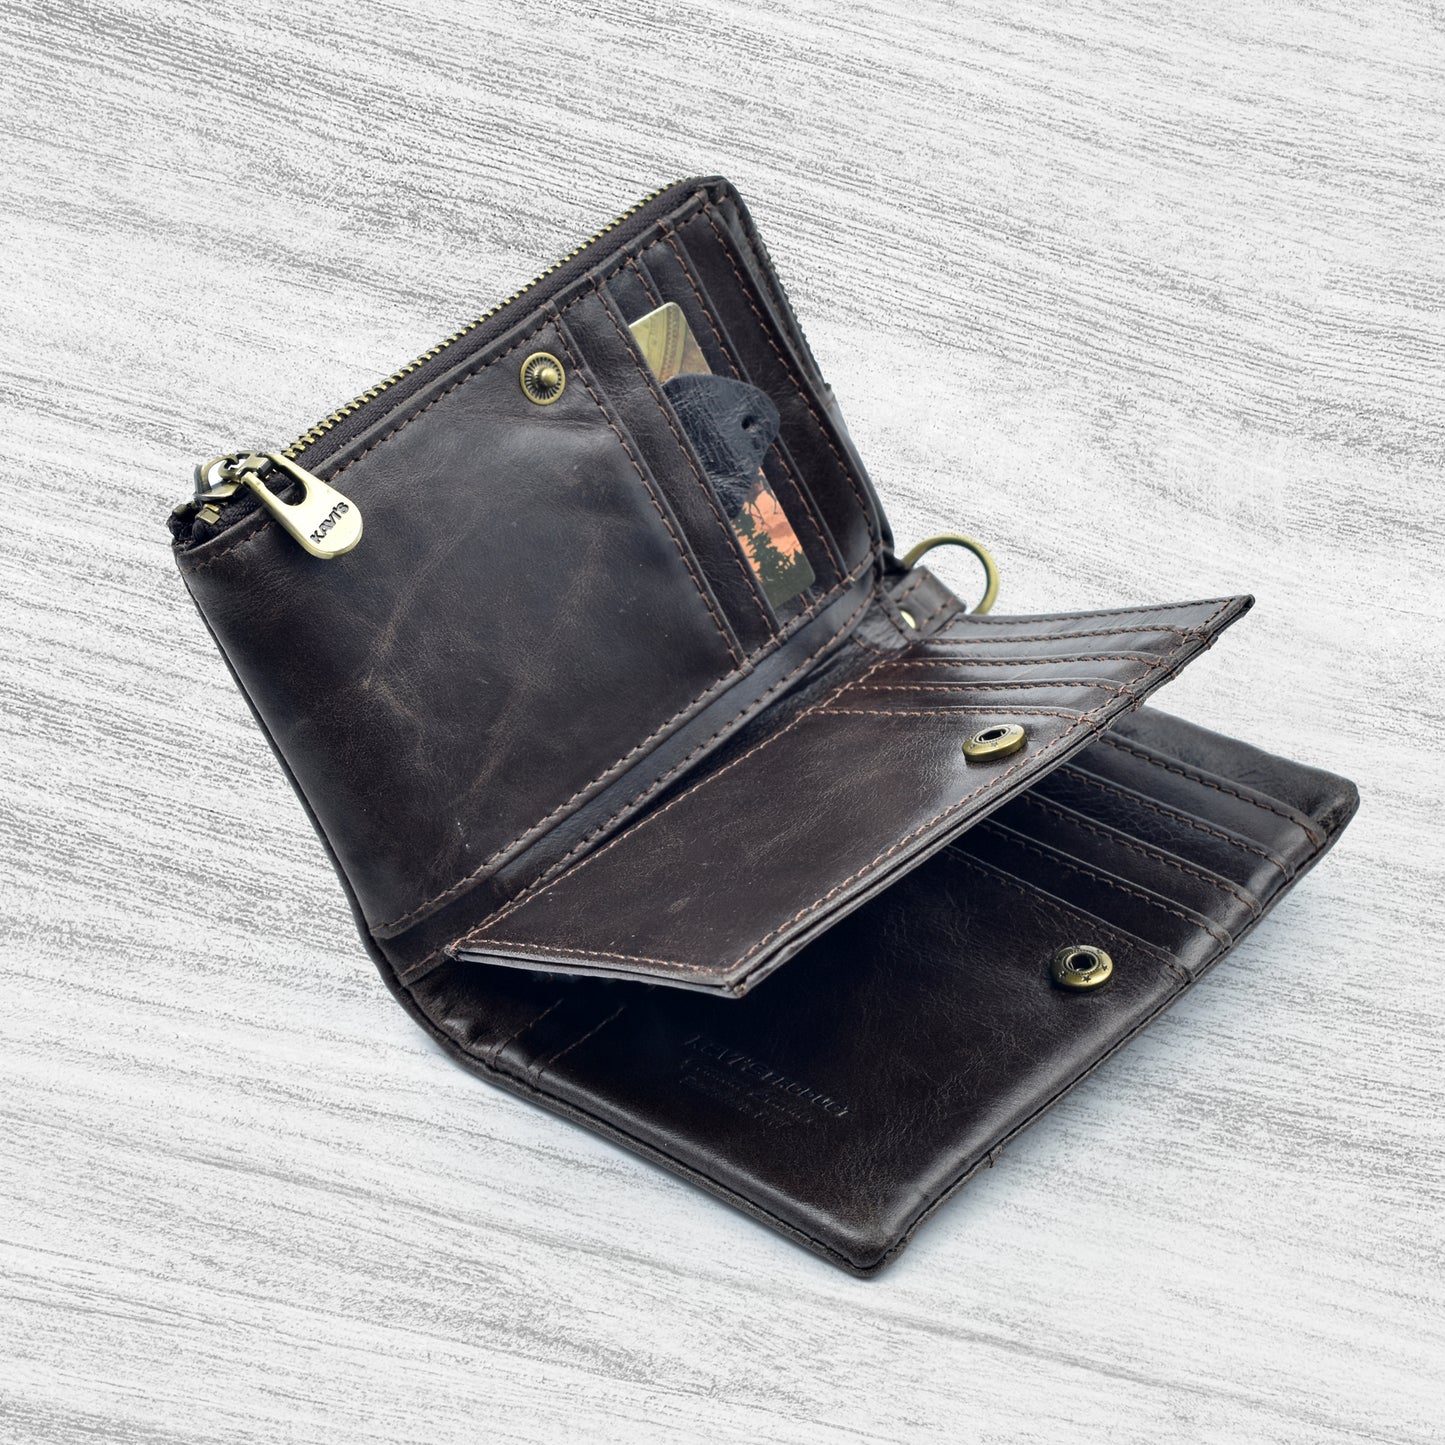 Original KAVI's Leather Wallet | Original Leather Imported From China | KAVIS 14